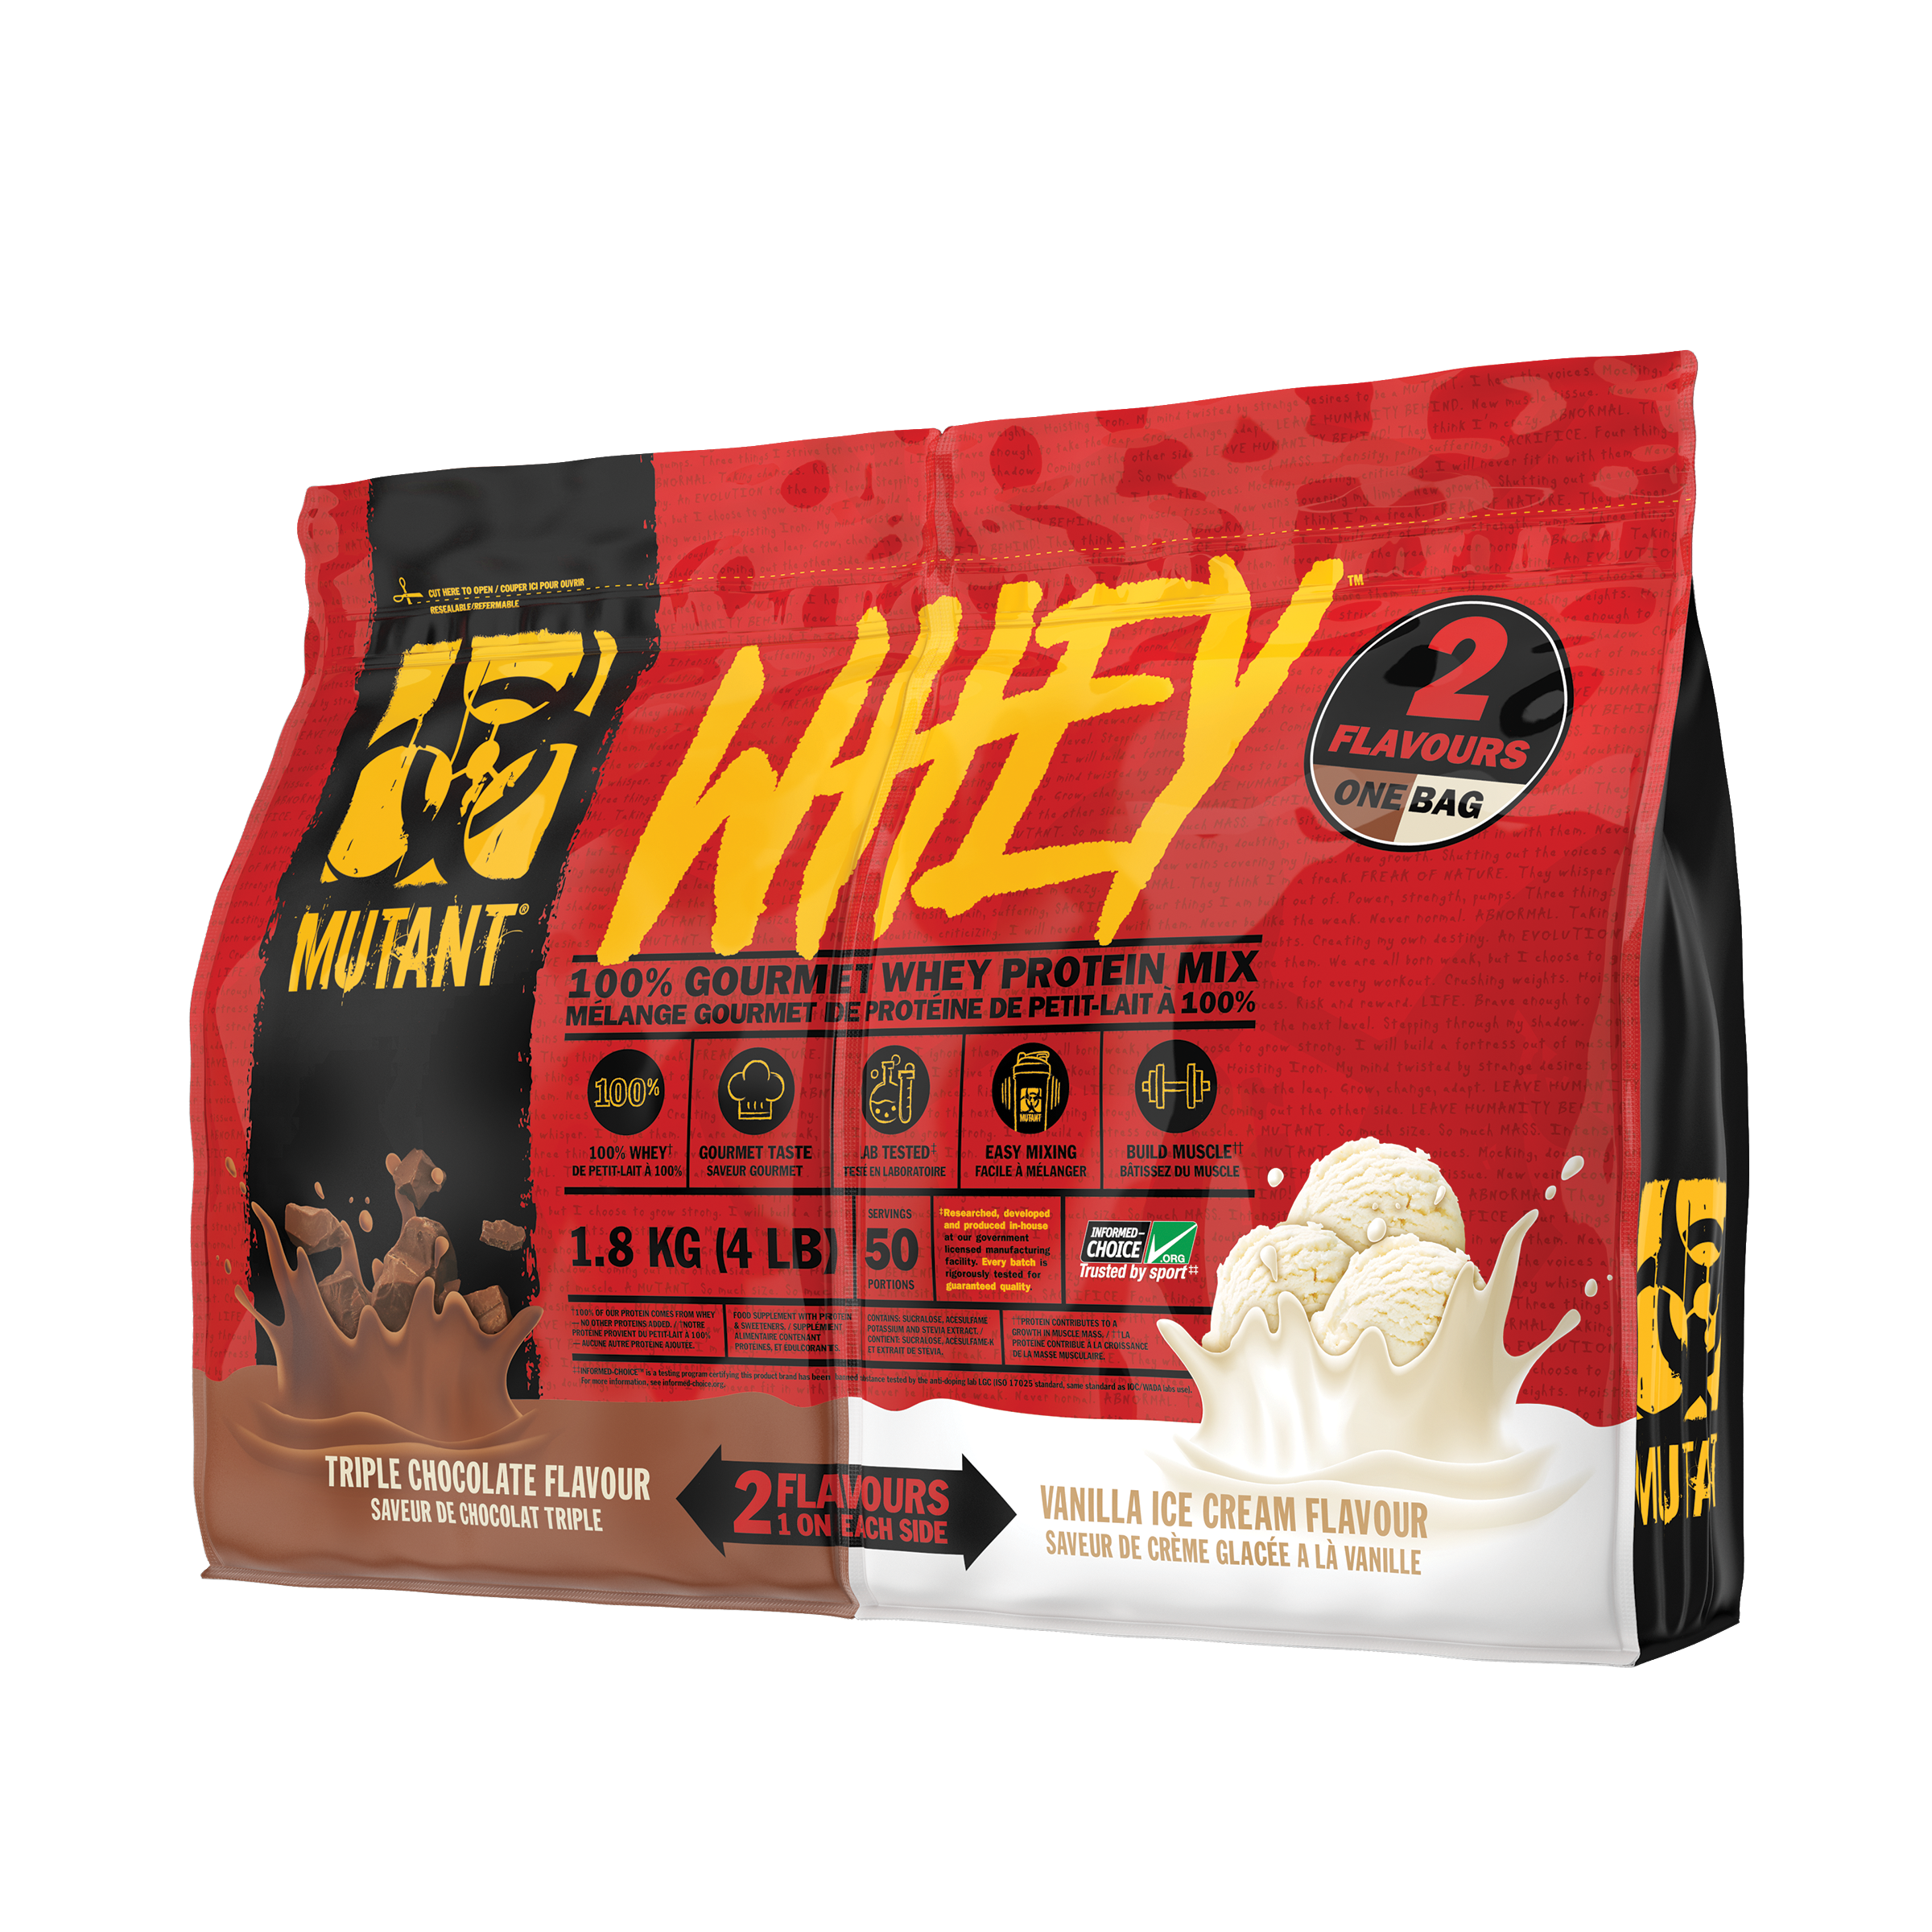 Mutant Whey Dual chamber (4lb/2 flavours in one bag) Whey Protein Triple Chocolate & Vanilla Mutant